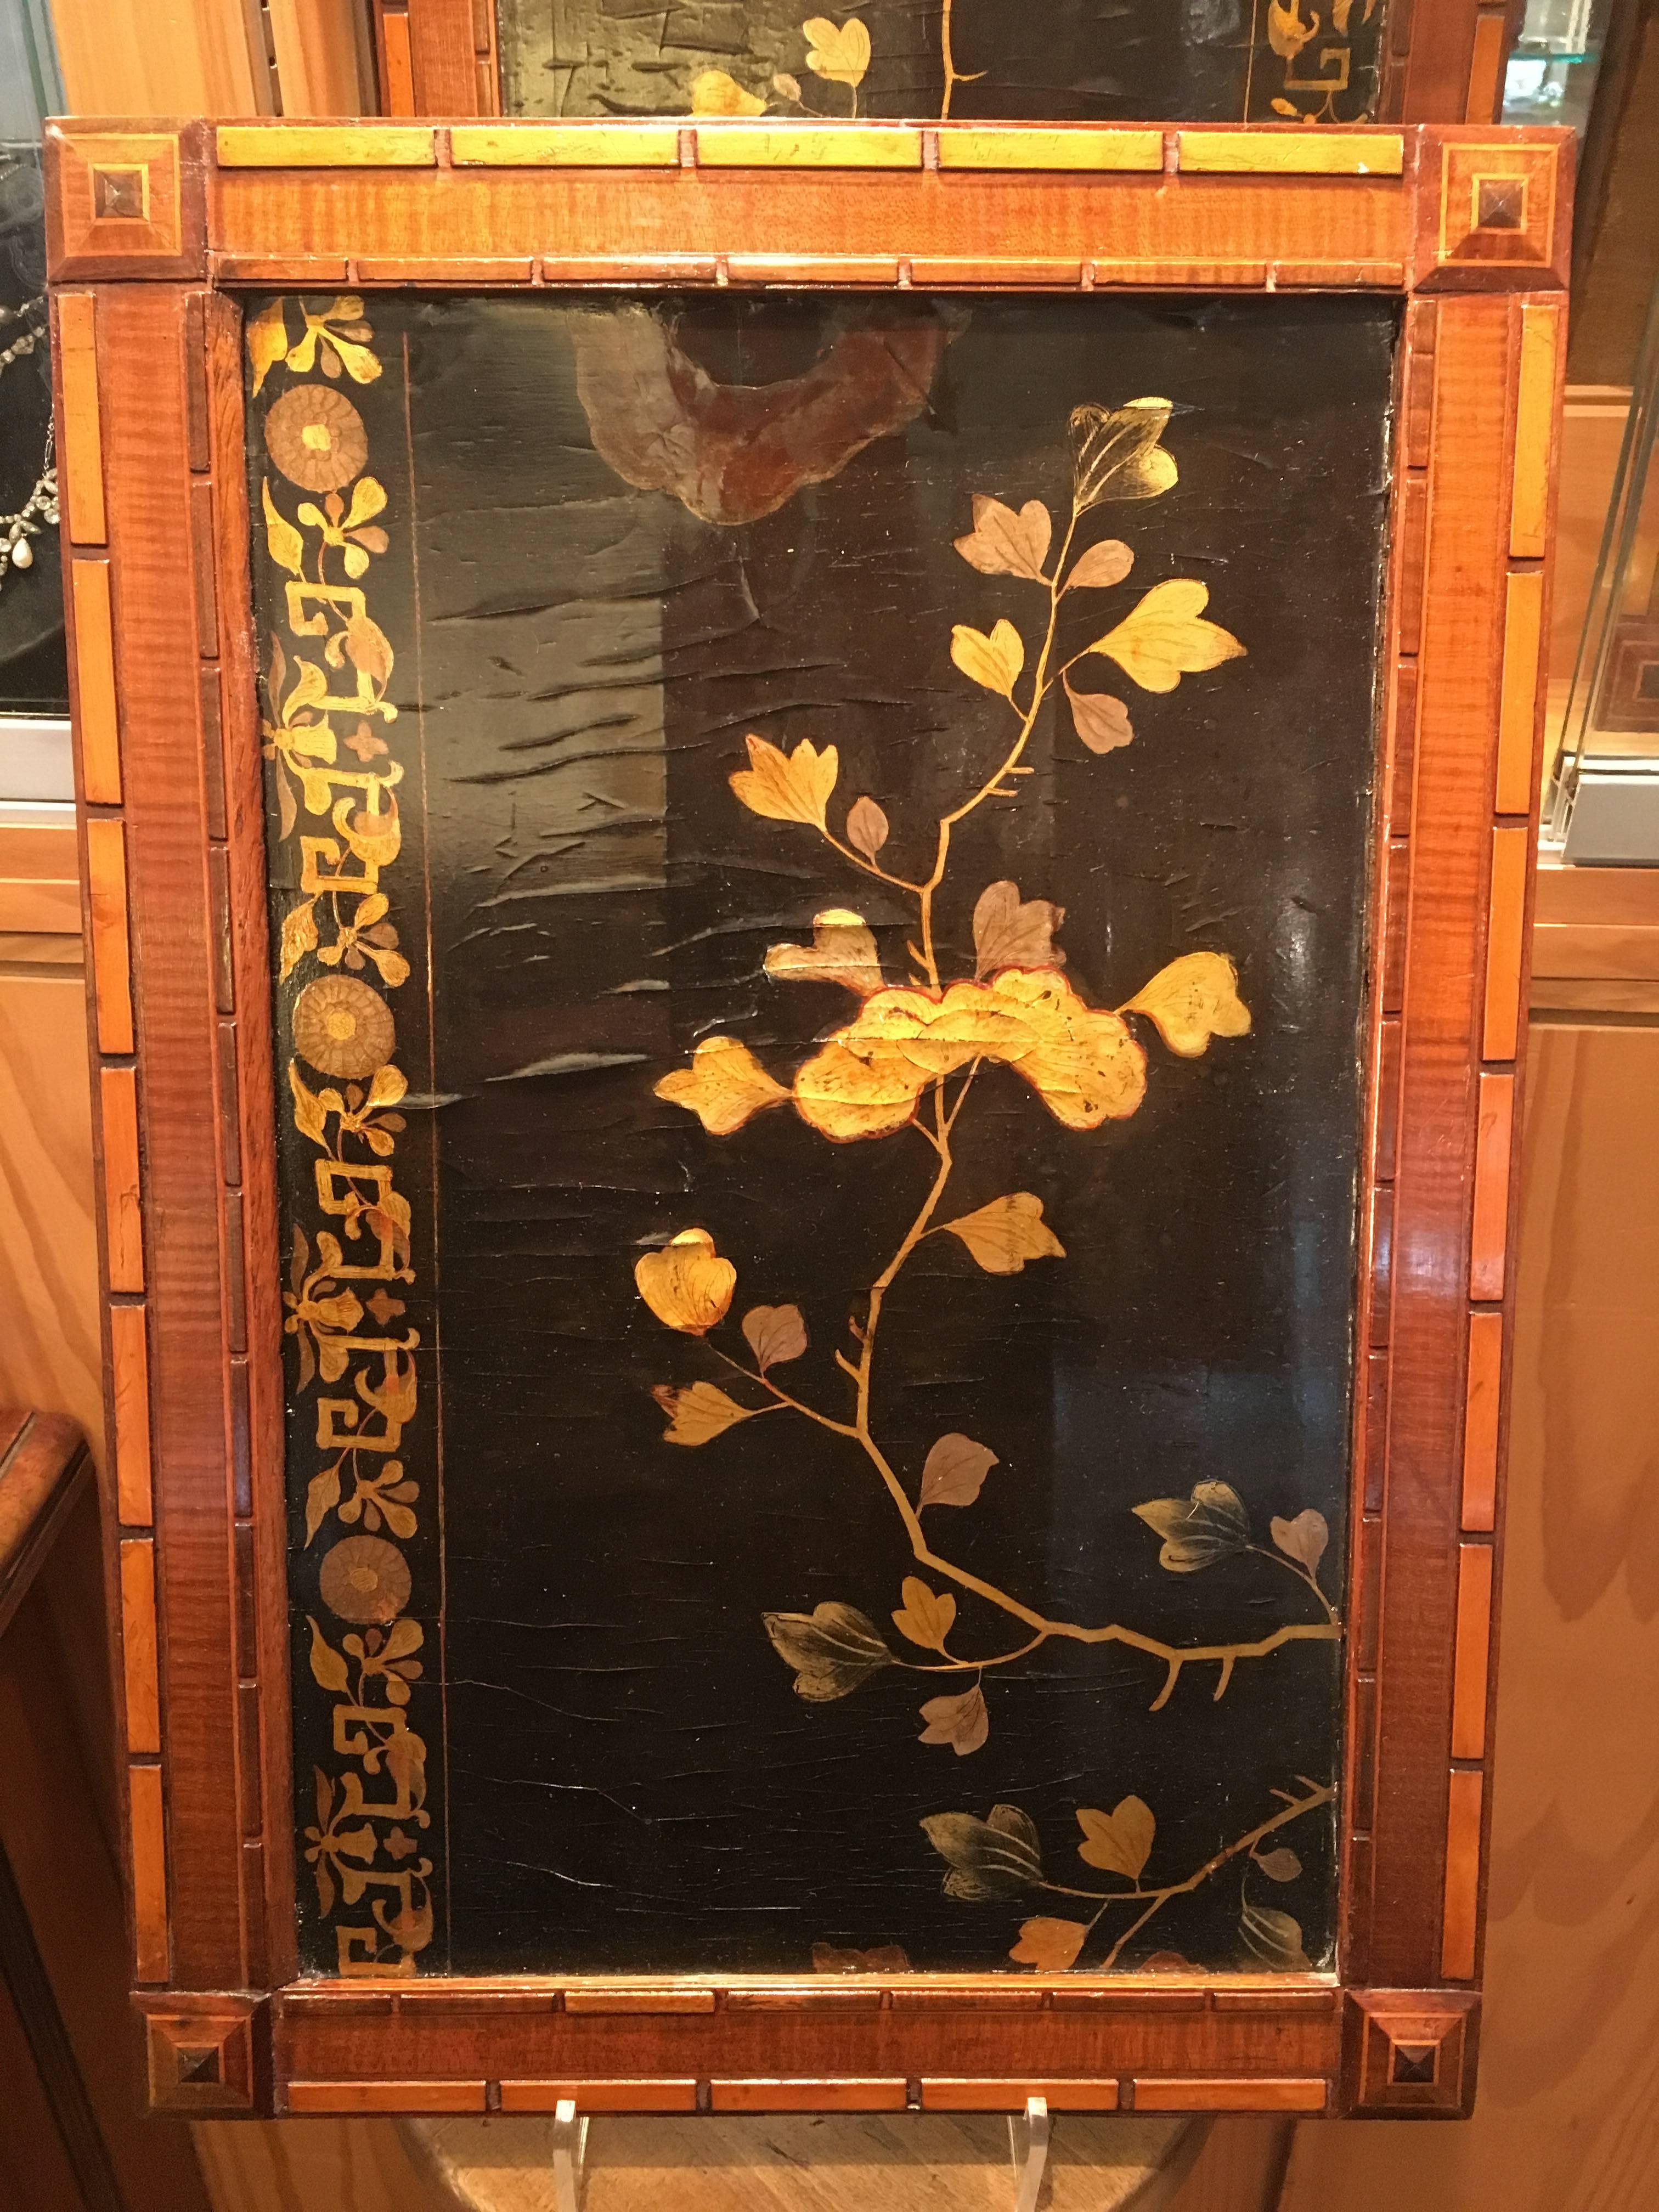 A wonderfully decorative and rare set of eight oriental lacquer panels, originally from a cruise ship. Each with a lovely Eastern decorative scene, circa 1920s.

Very nicely sized, each panel measuring 21 x 14 inches. Mounted on a hardwood frame.